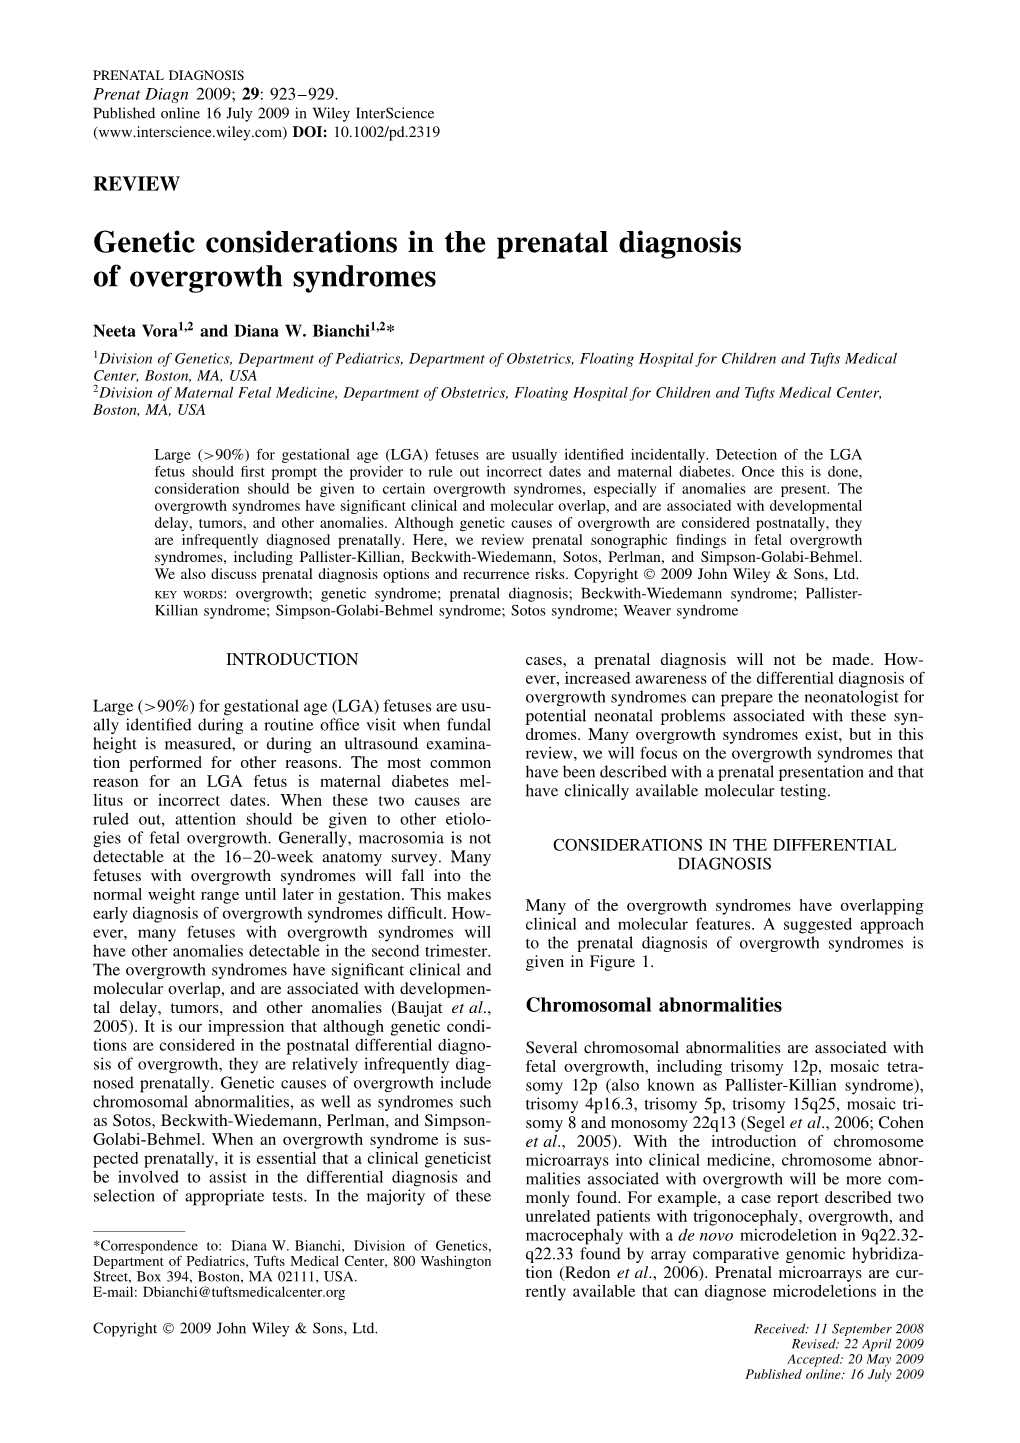 Genetic Considerations in the Prenatal Diagnosis of Overgrowth Syndromes